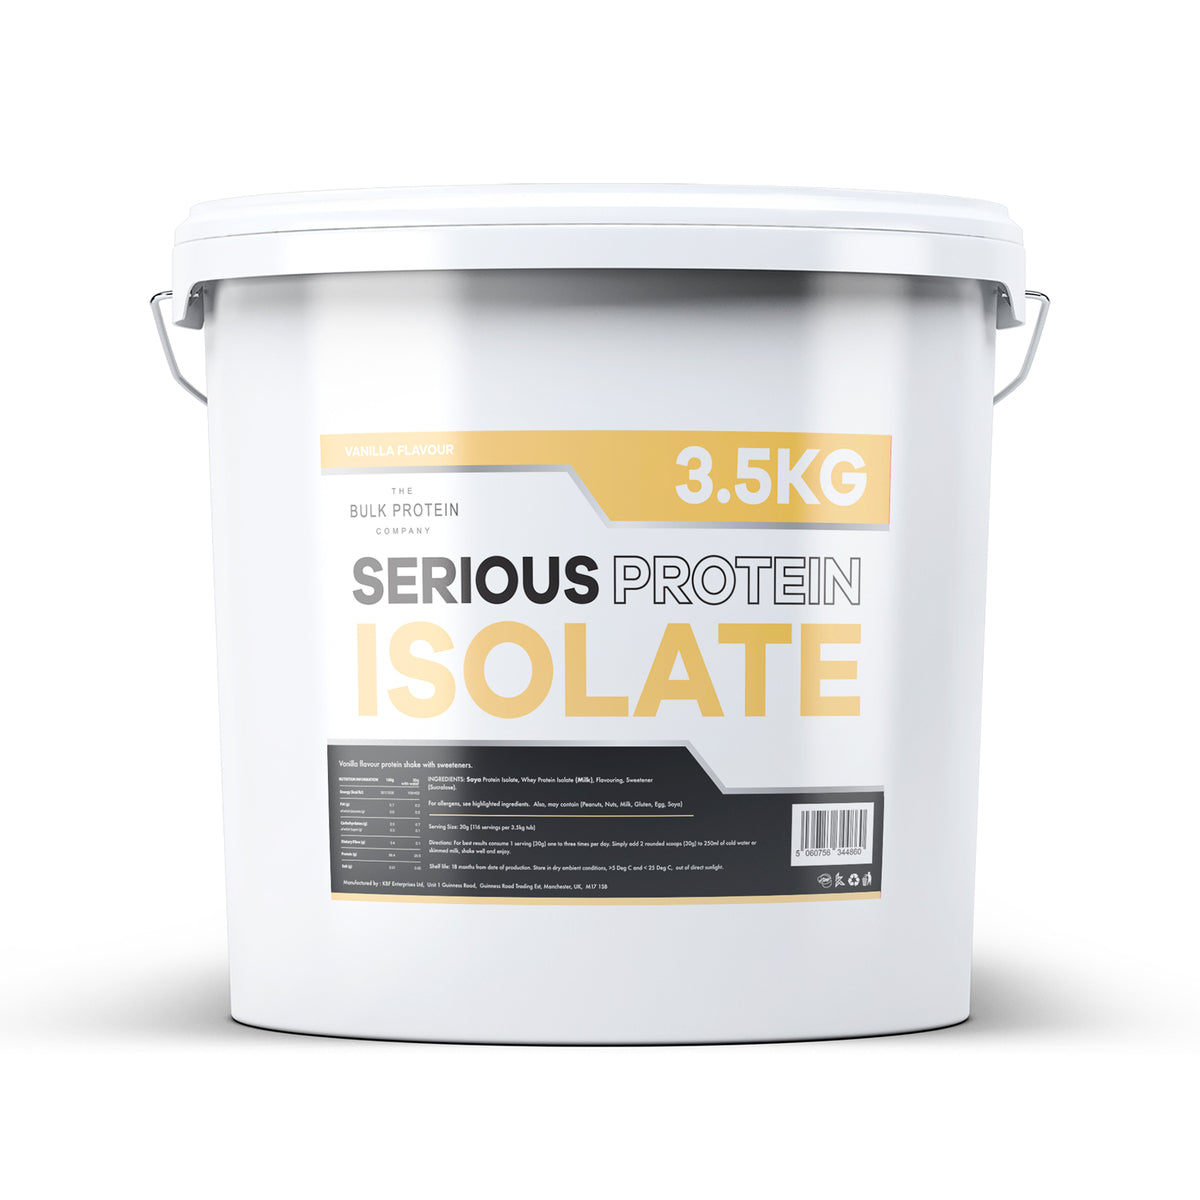 The Bulk Protein Company Serious Protein Isolate – 3.5kg